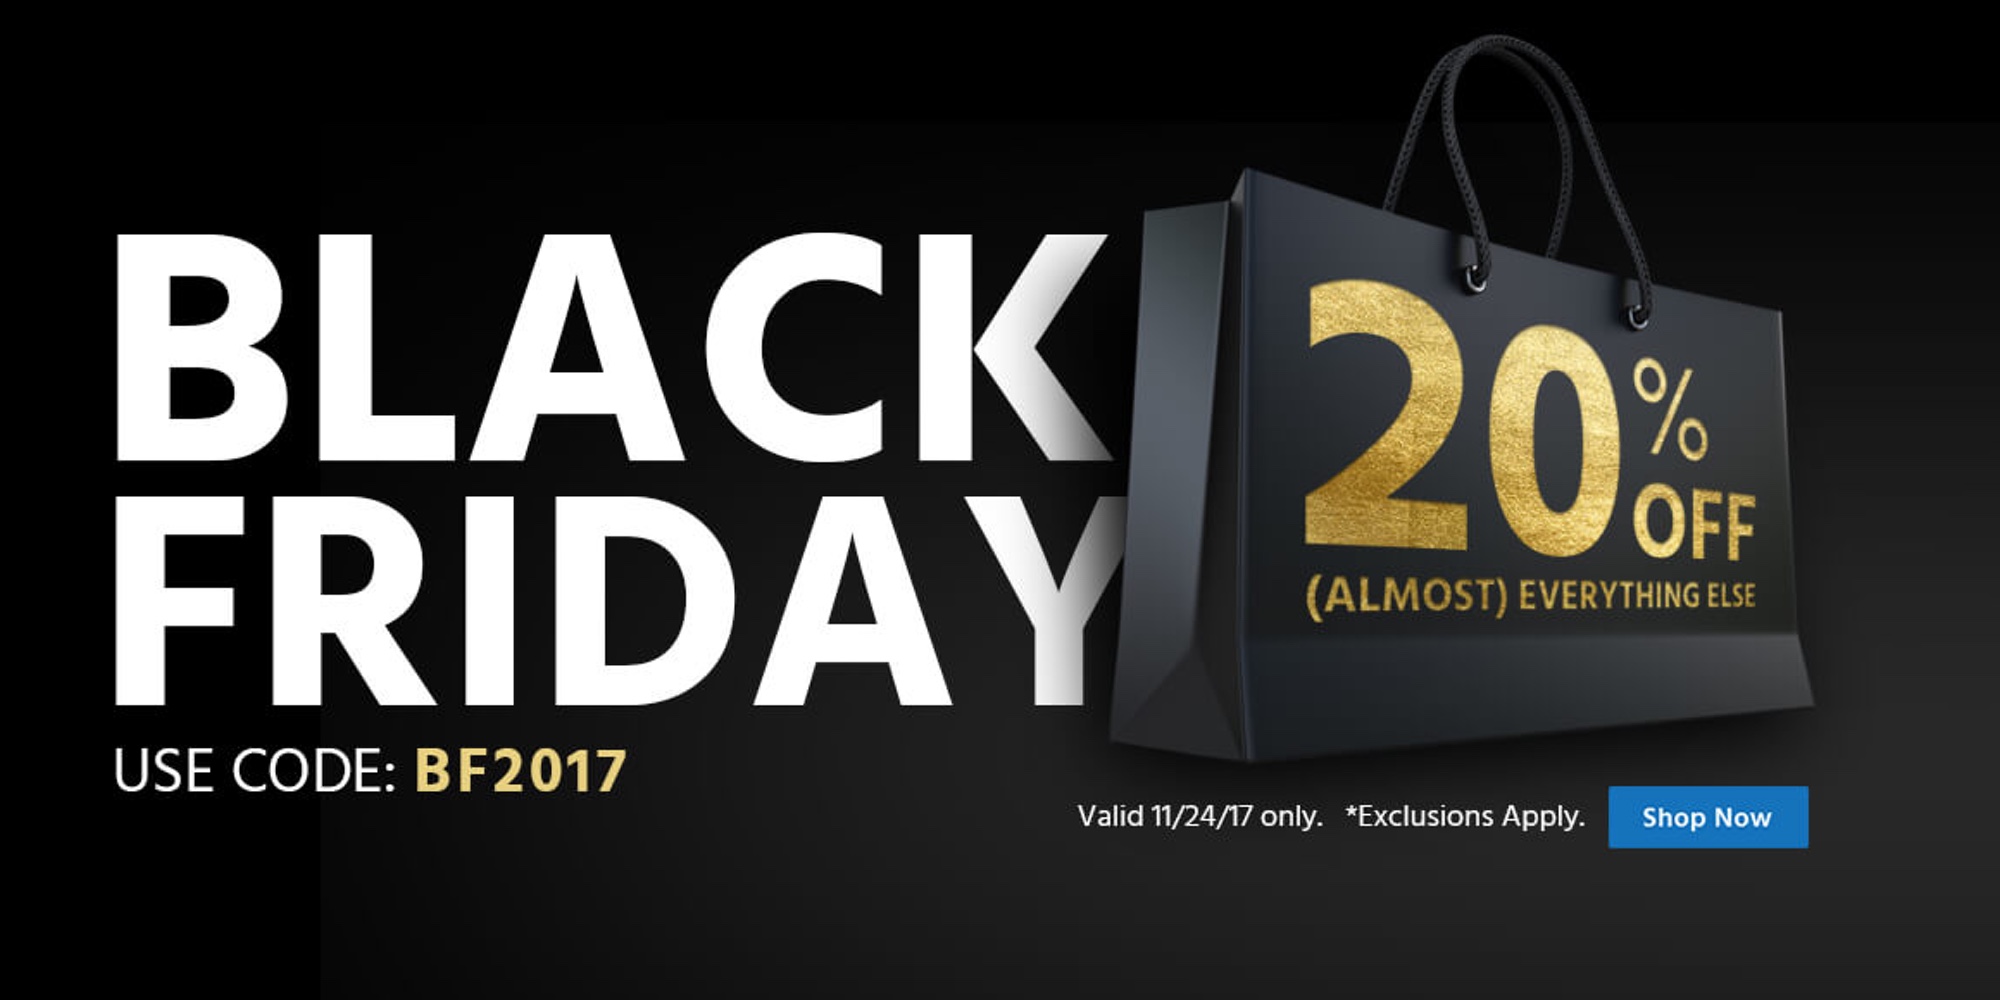 Monoprice Black Friday coupon code takes 20% off sitewide: cables - What Auto Manufactorer Has Black Friday Deals